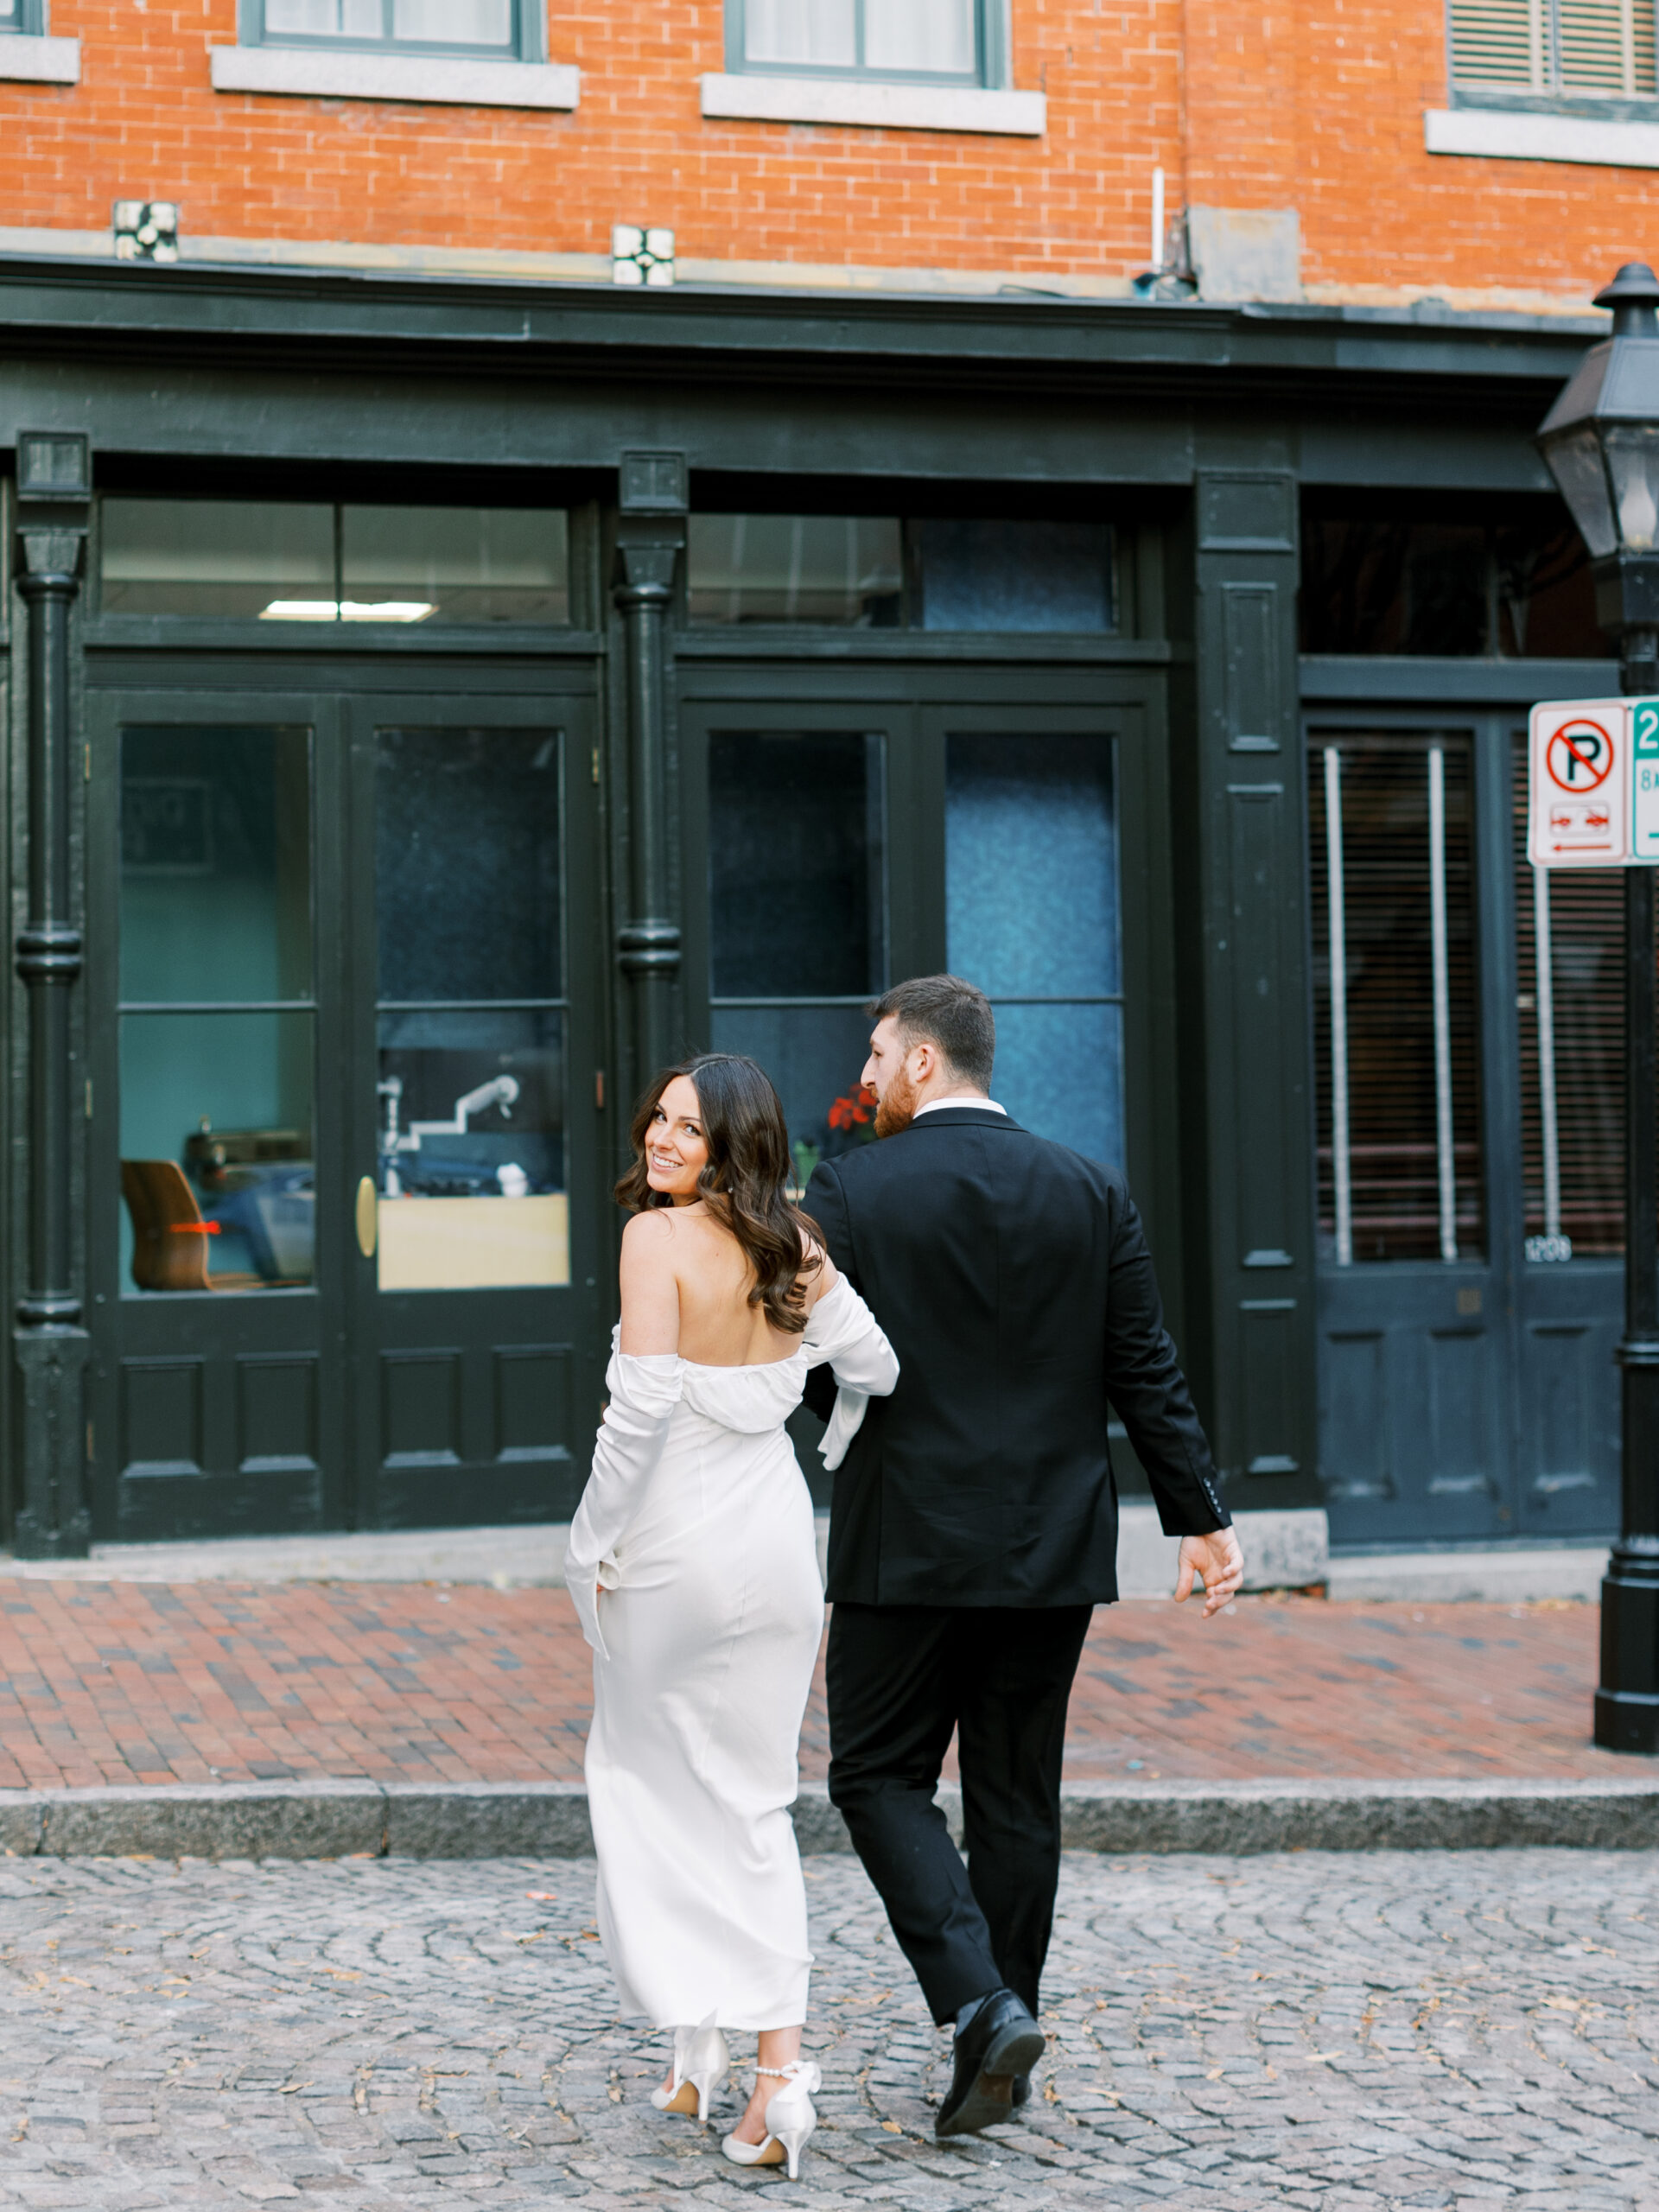 engaged couple in suit and white silk dress cross cobblestone downtown street